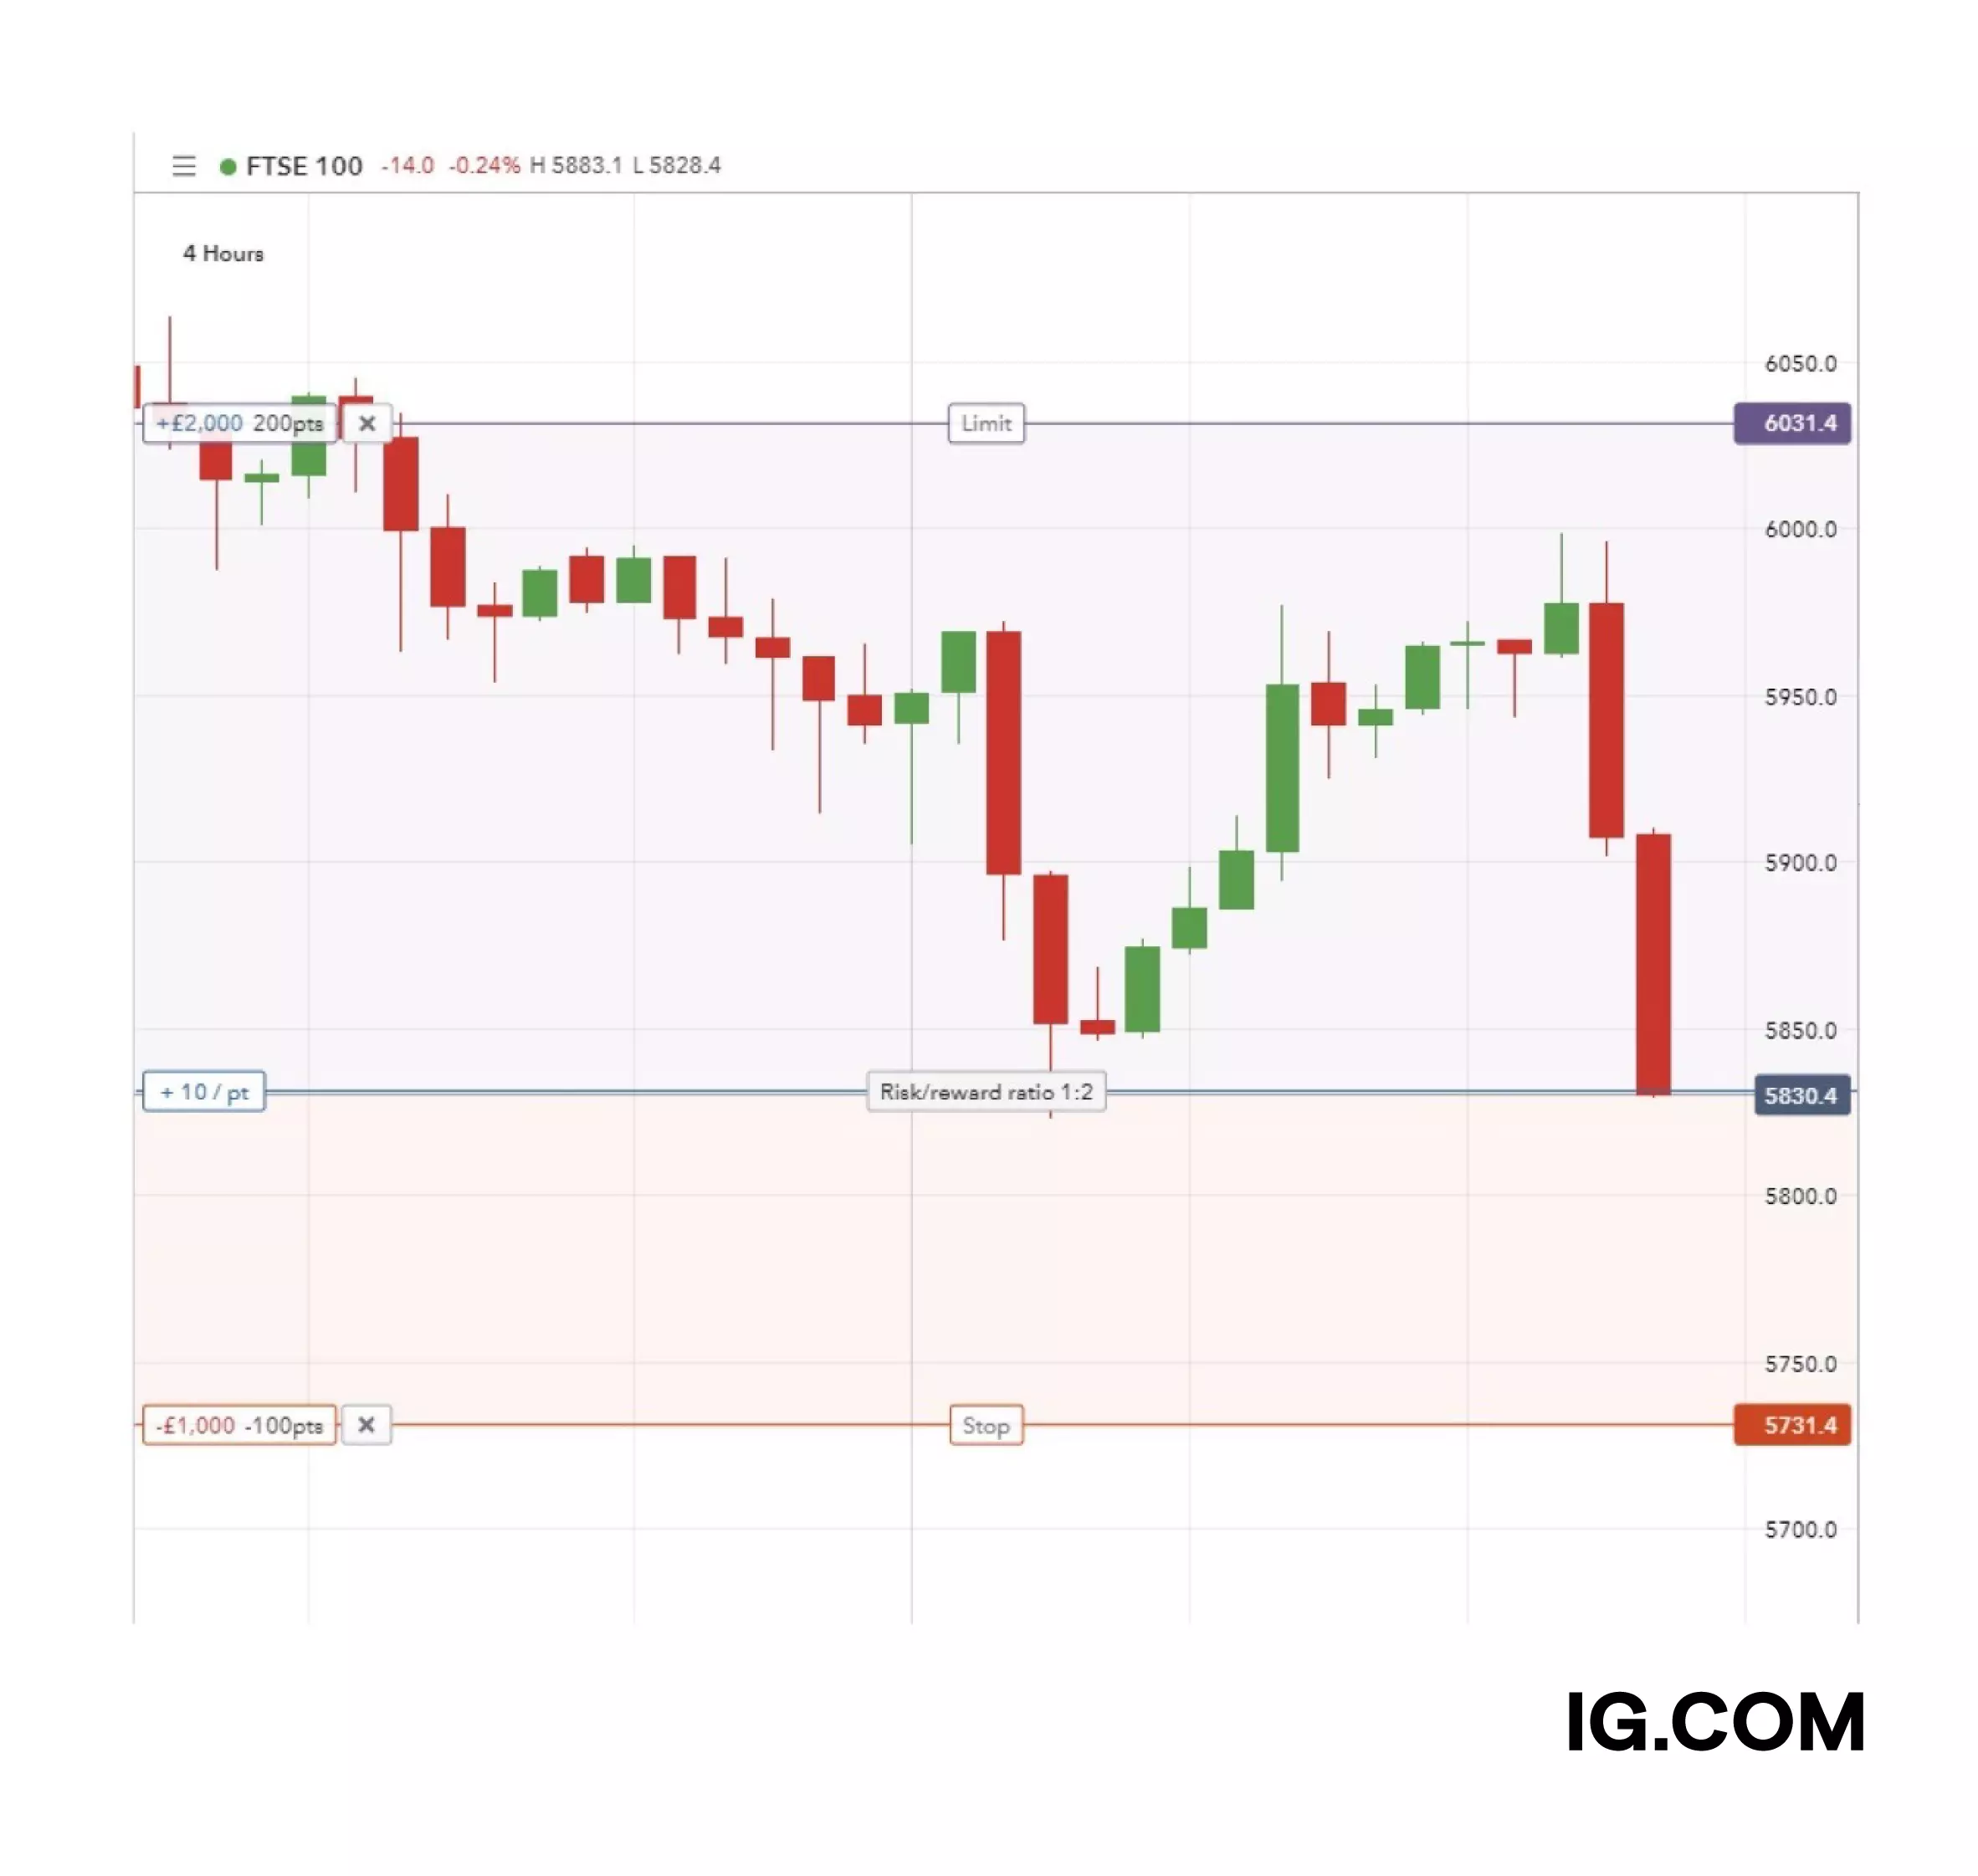 A candlestick chart showing the market’s current price, the limit level and the stop level. The risk-to-reward ratio is also shown, at 1:2.